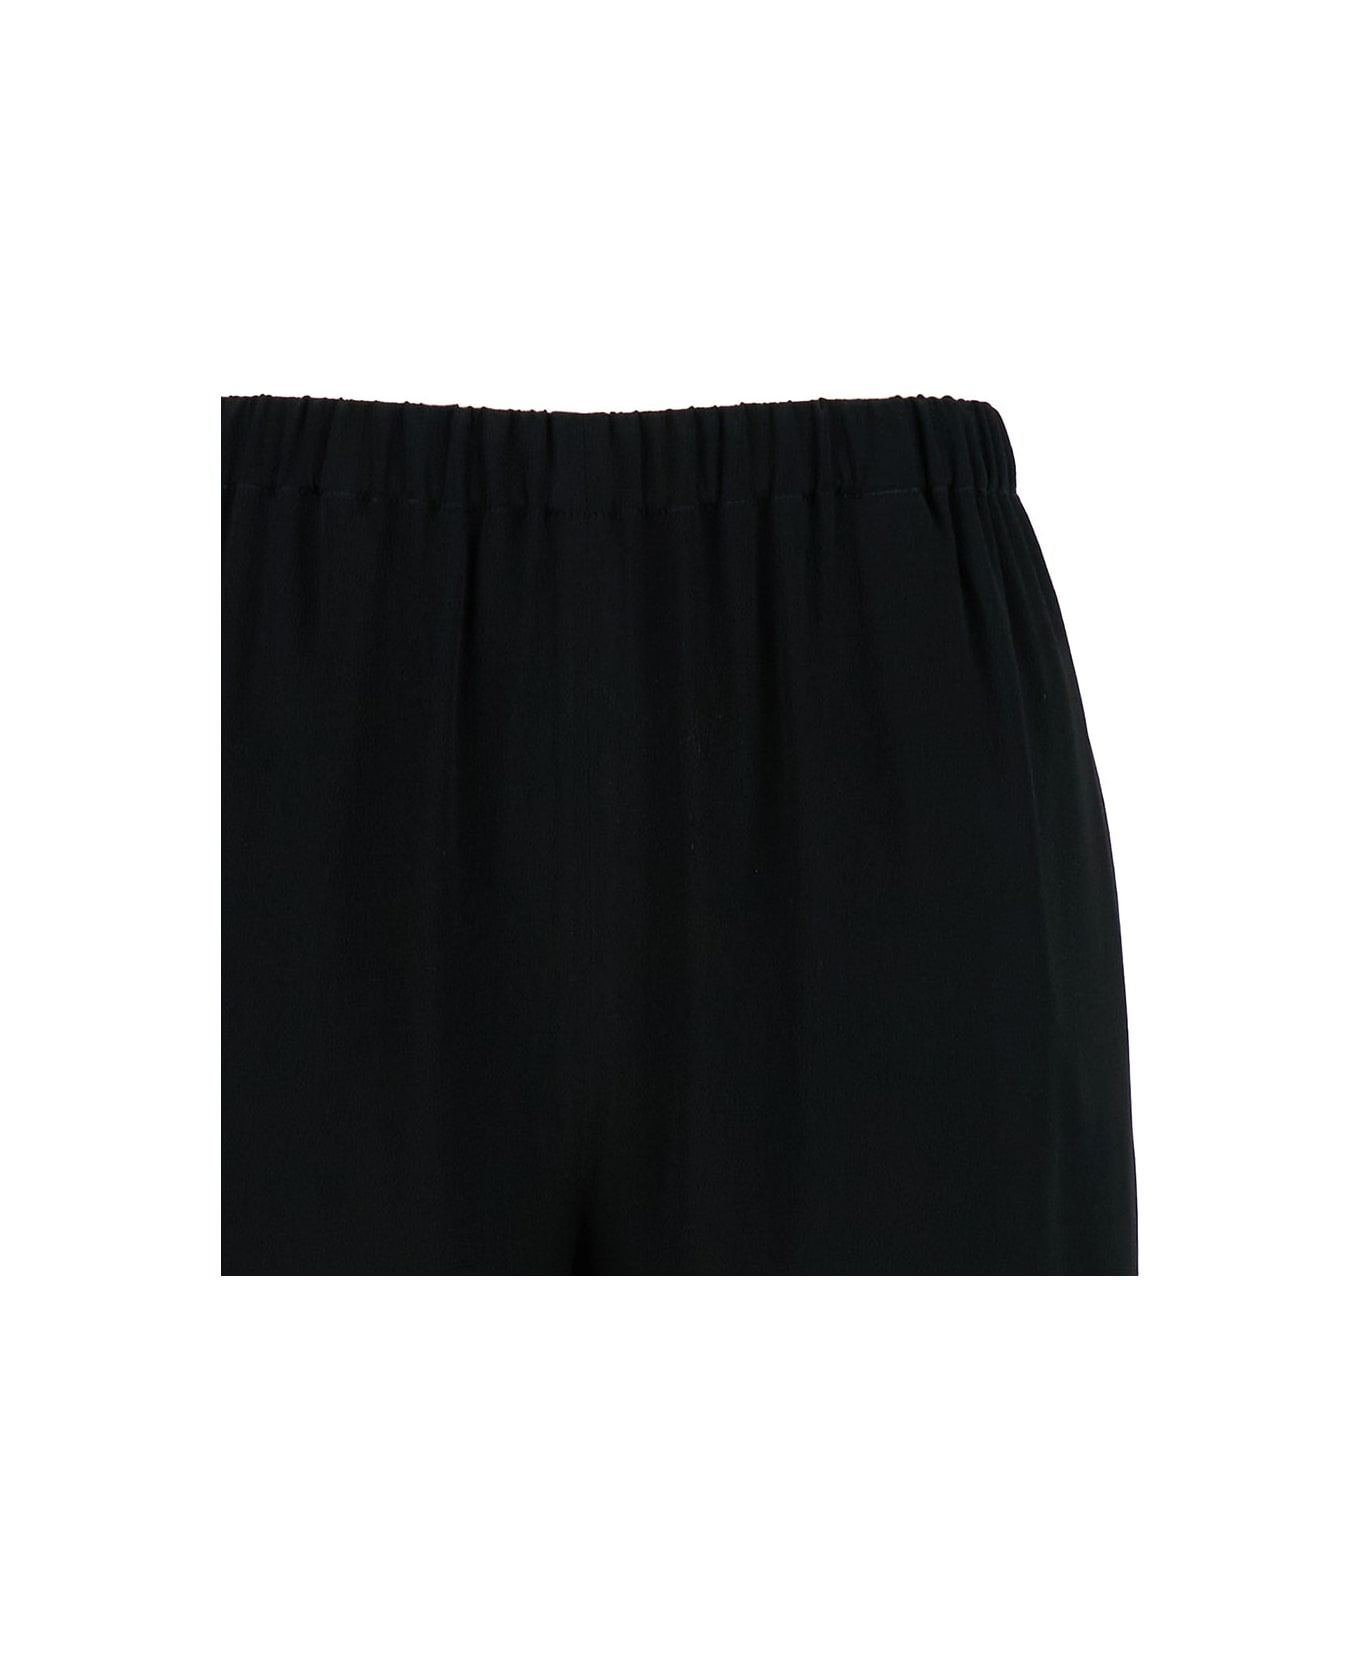 Antonelli Black Loose Pants With Elastic Waistband In Silk Blend Woman - Black ボトムス